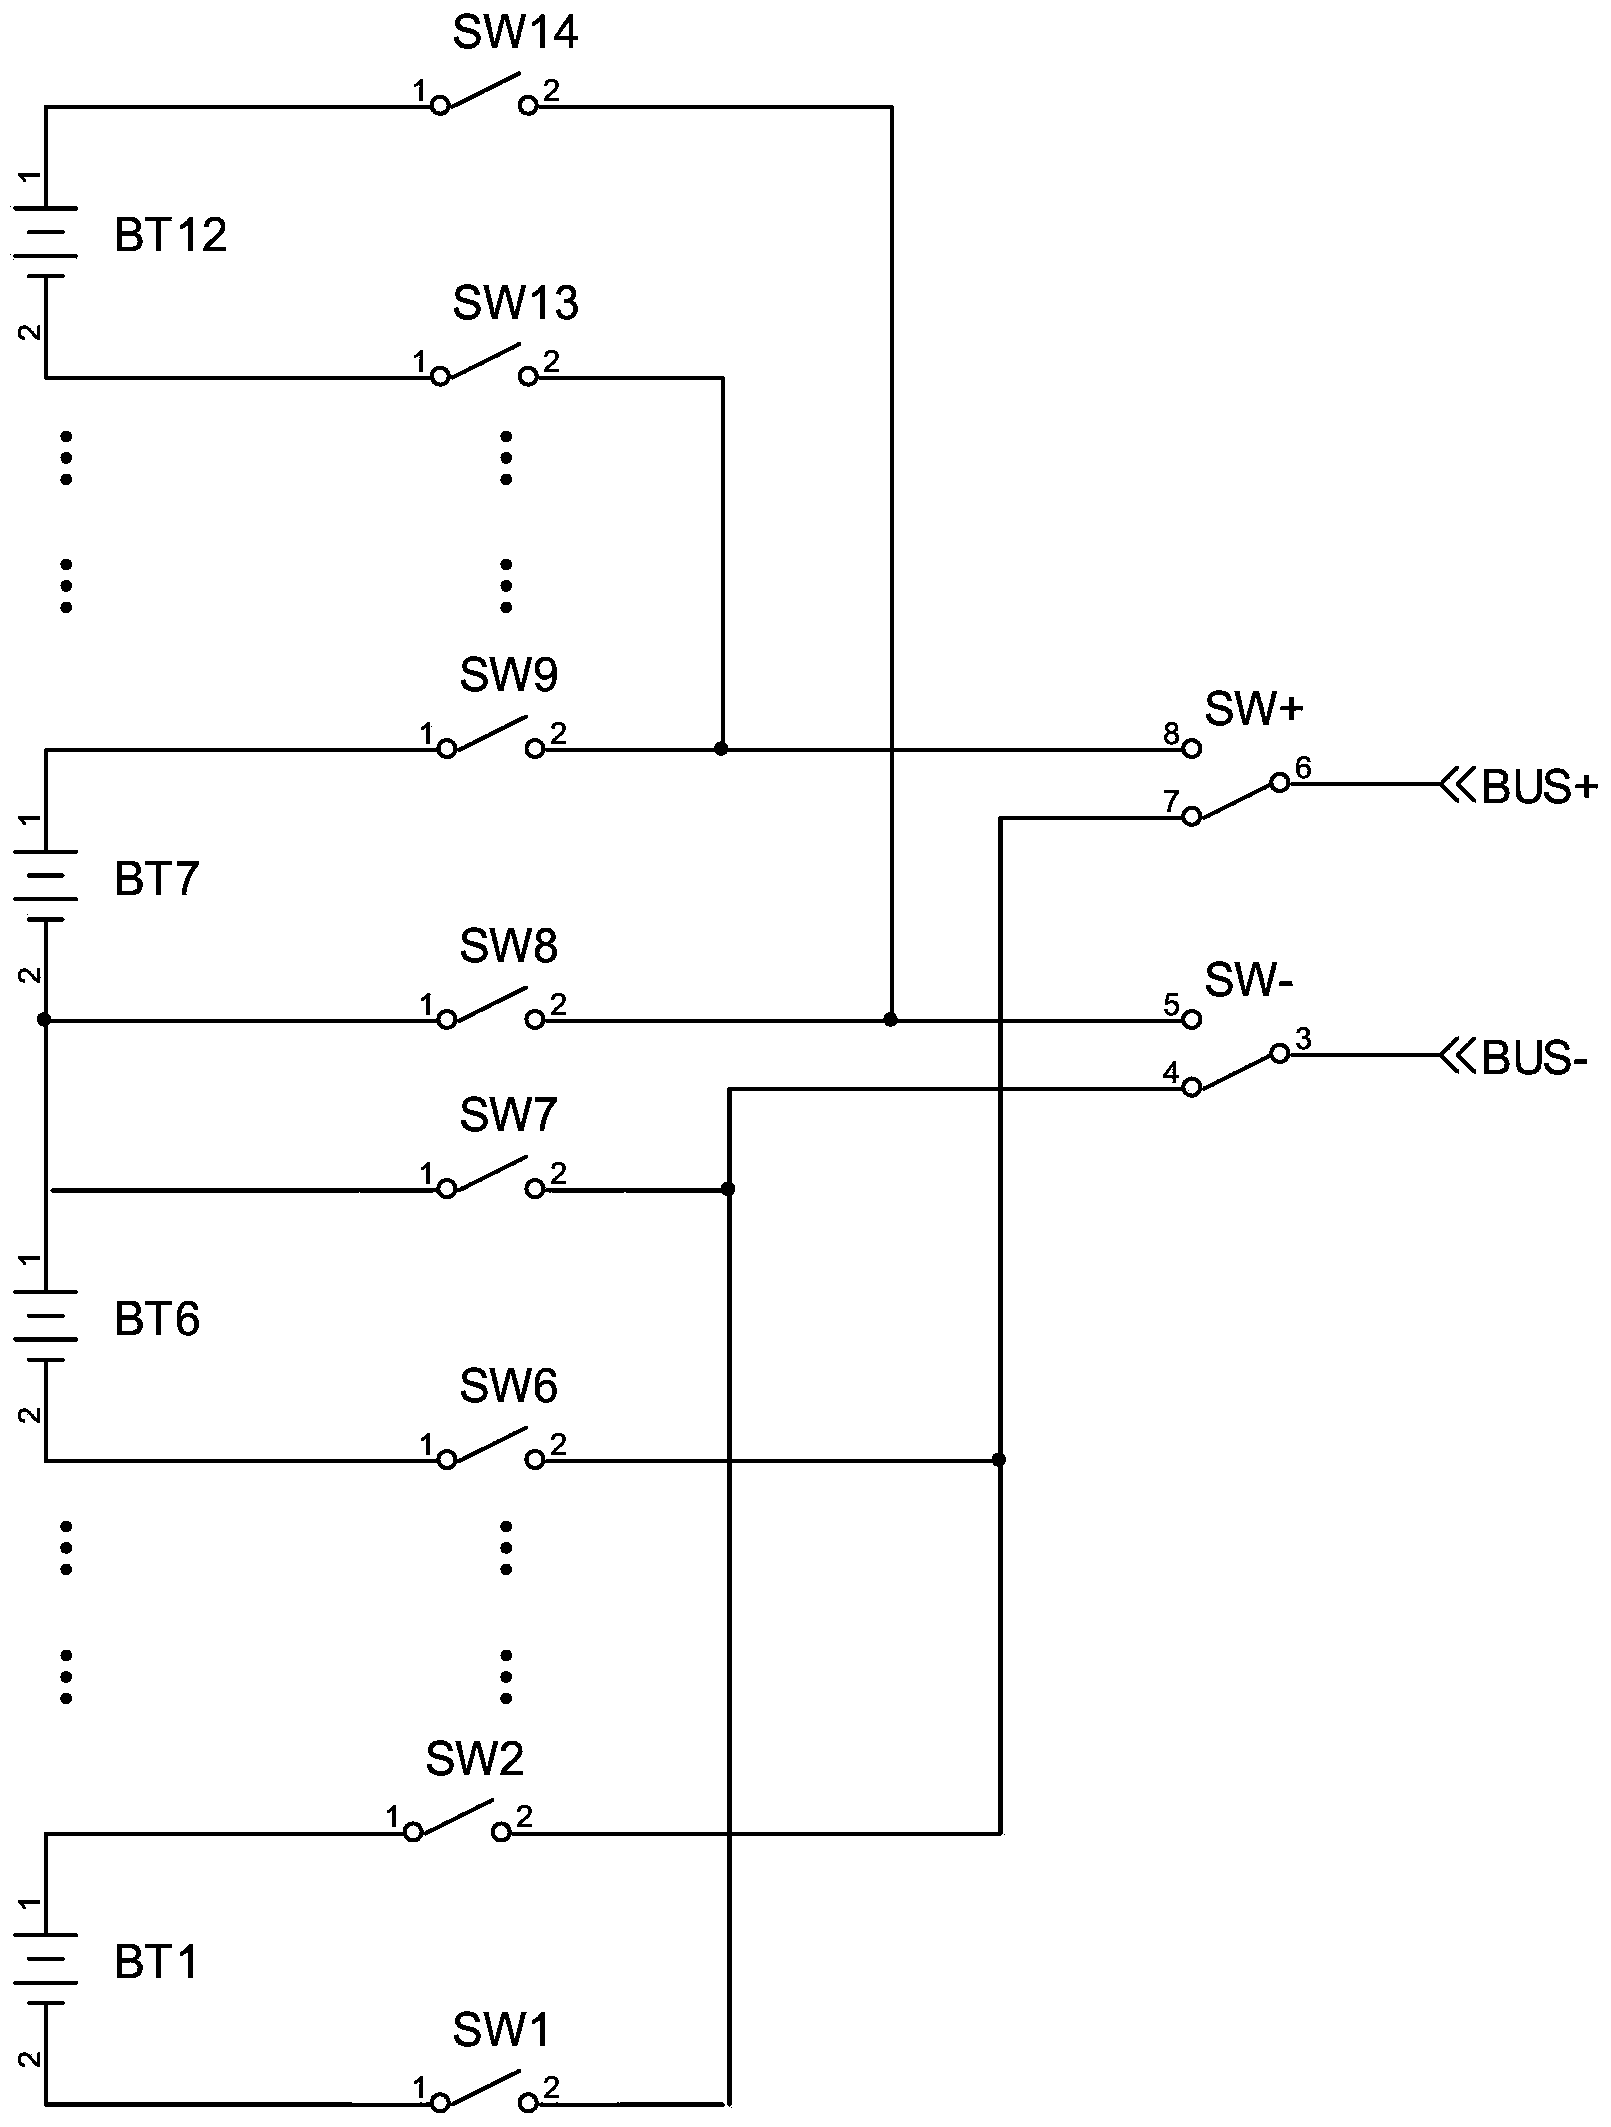 Balanced switching control circuit for battery management system